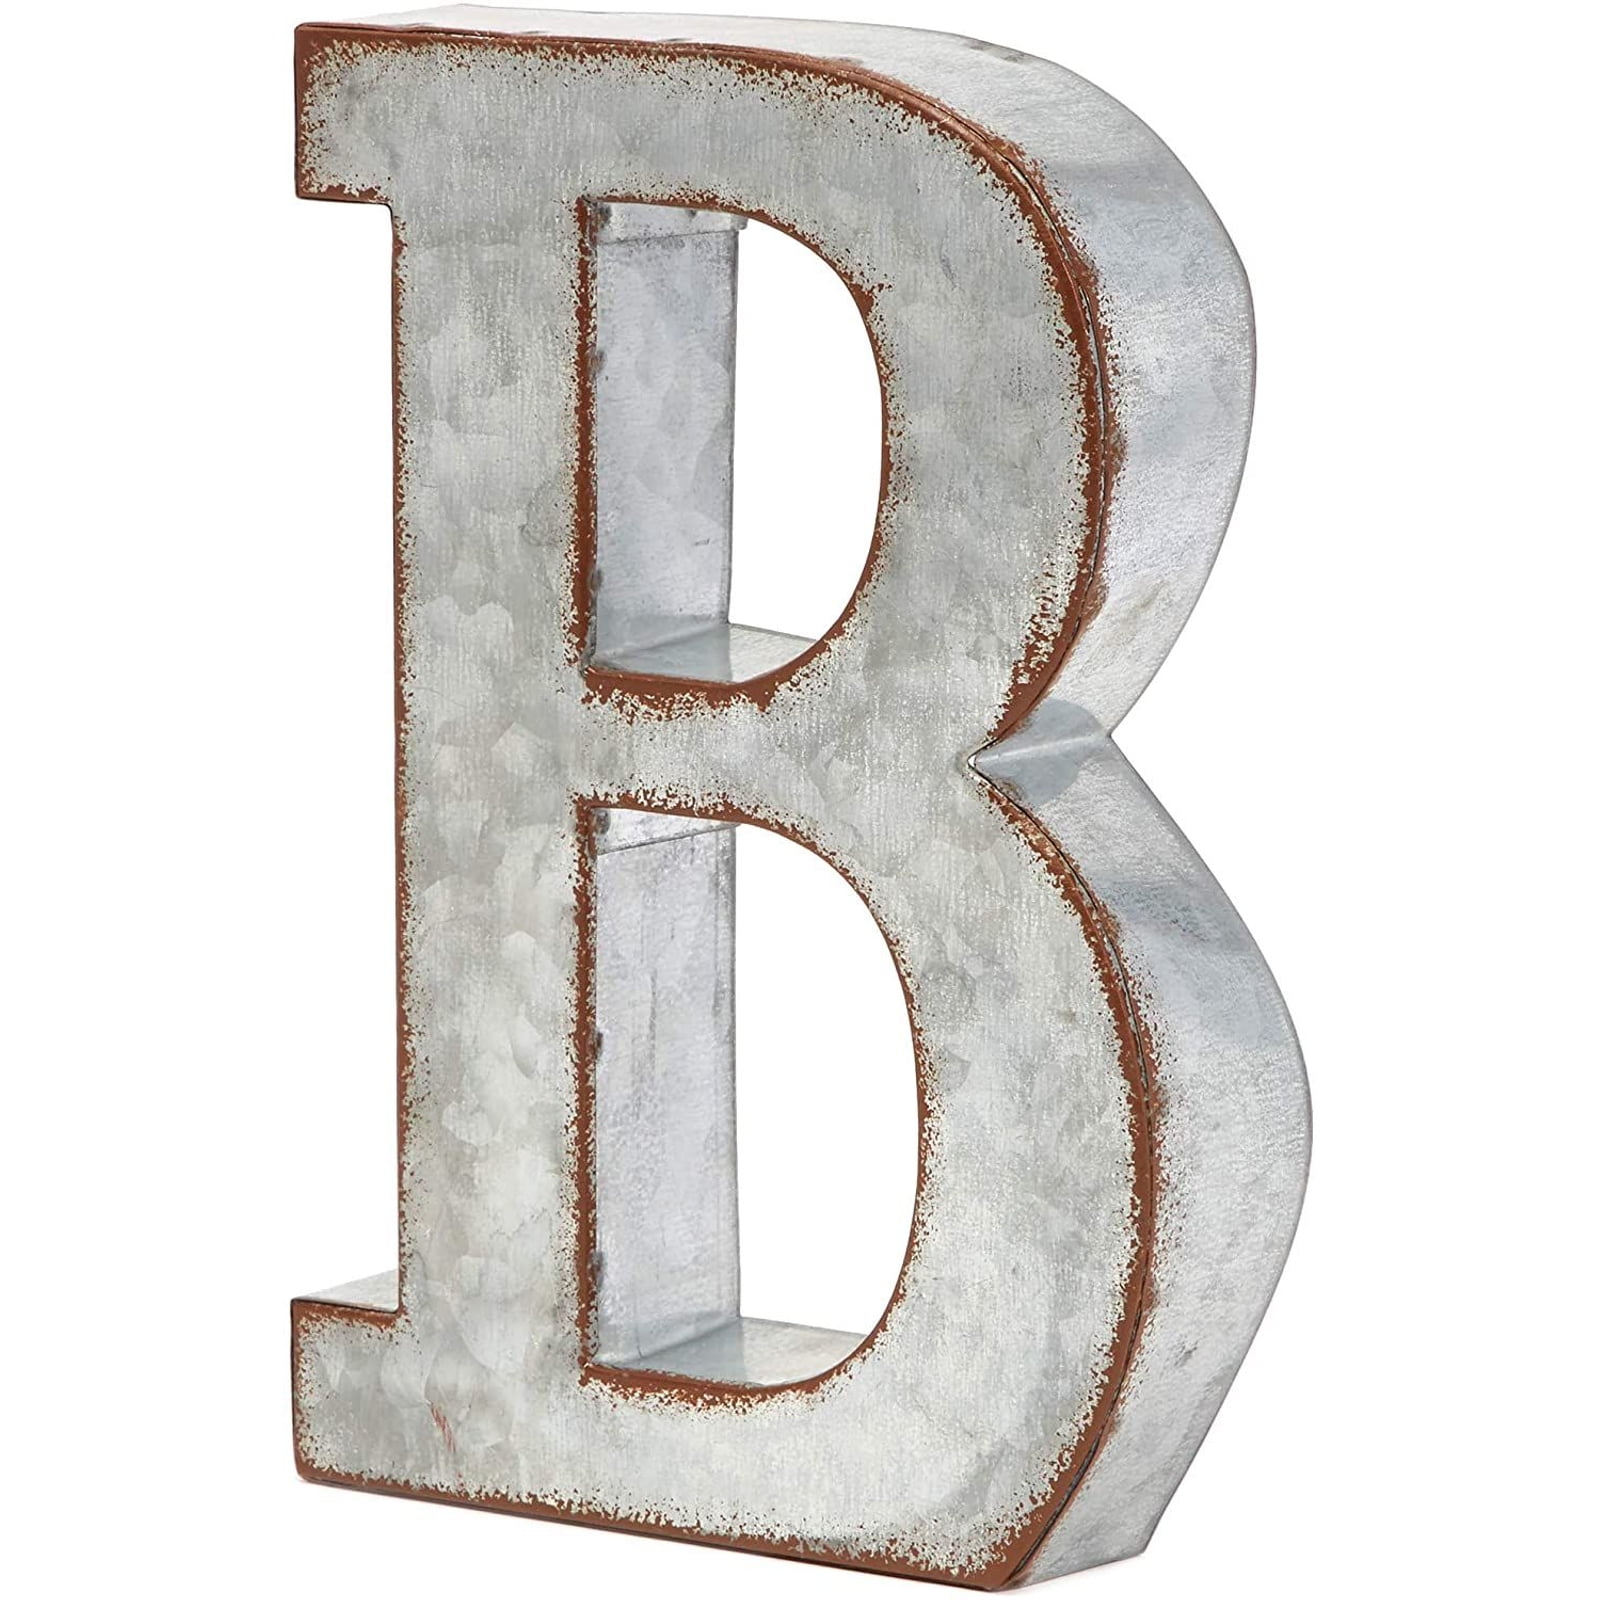 7" Galvanized Metal 3D Wall Decor T Letter Rusted Farmhouse Sign Decoration 